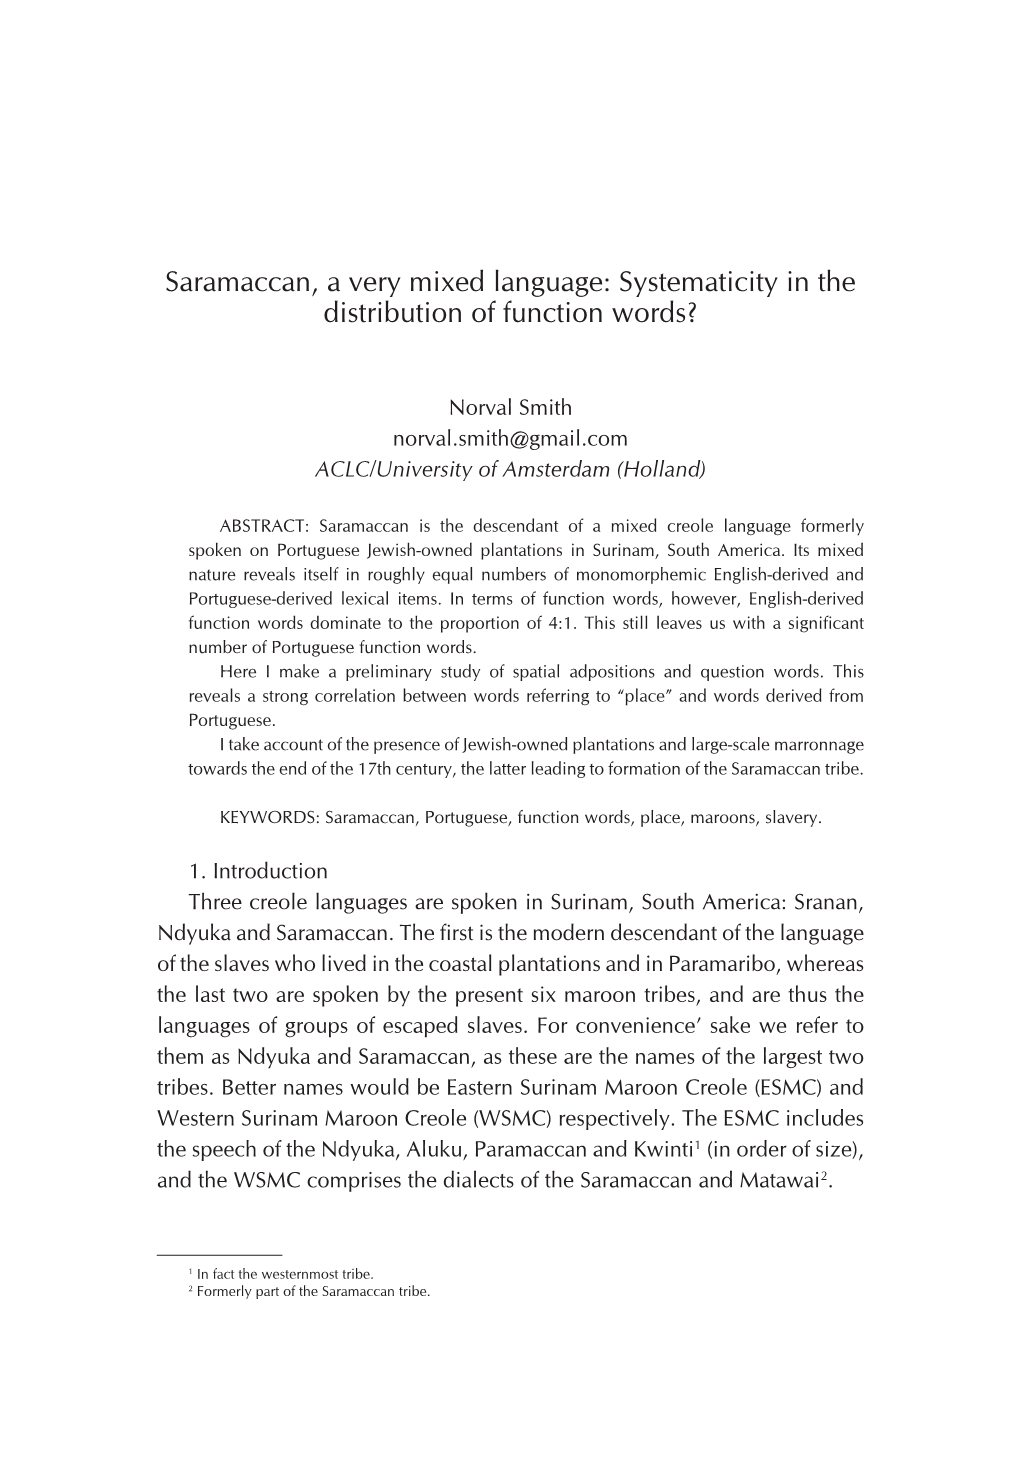 Saramaccan, a Very Mixed Language: Systematicity in the Distribution of Function Words?